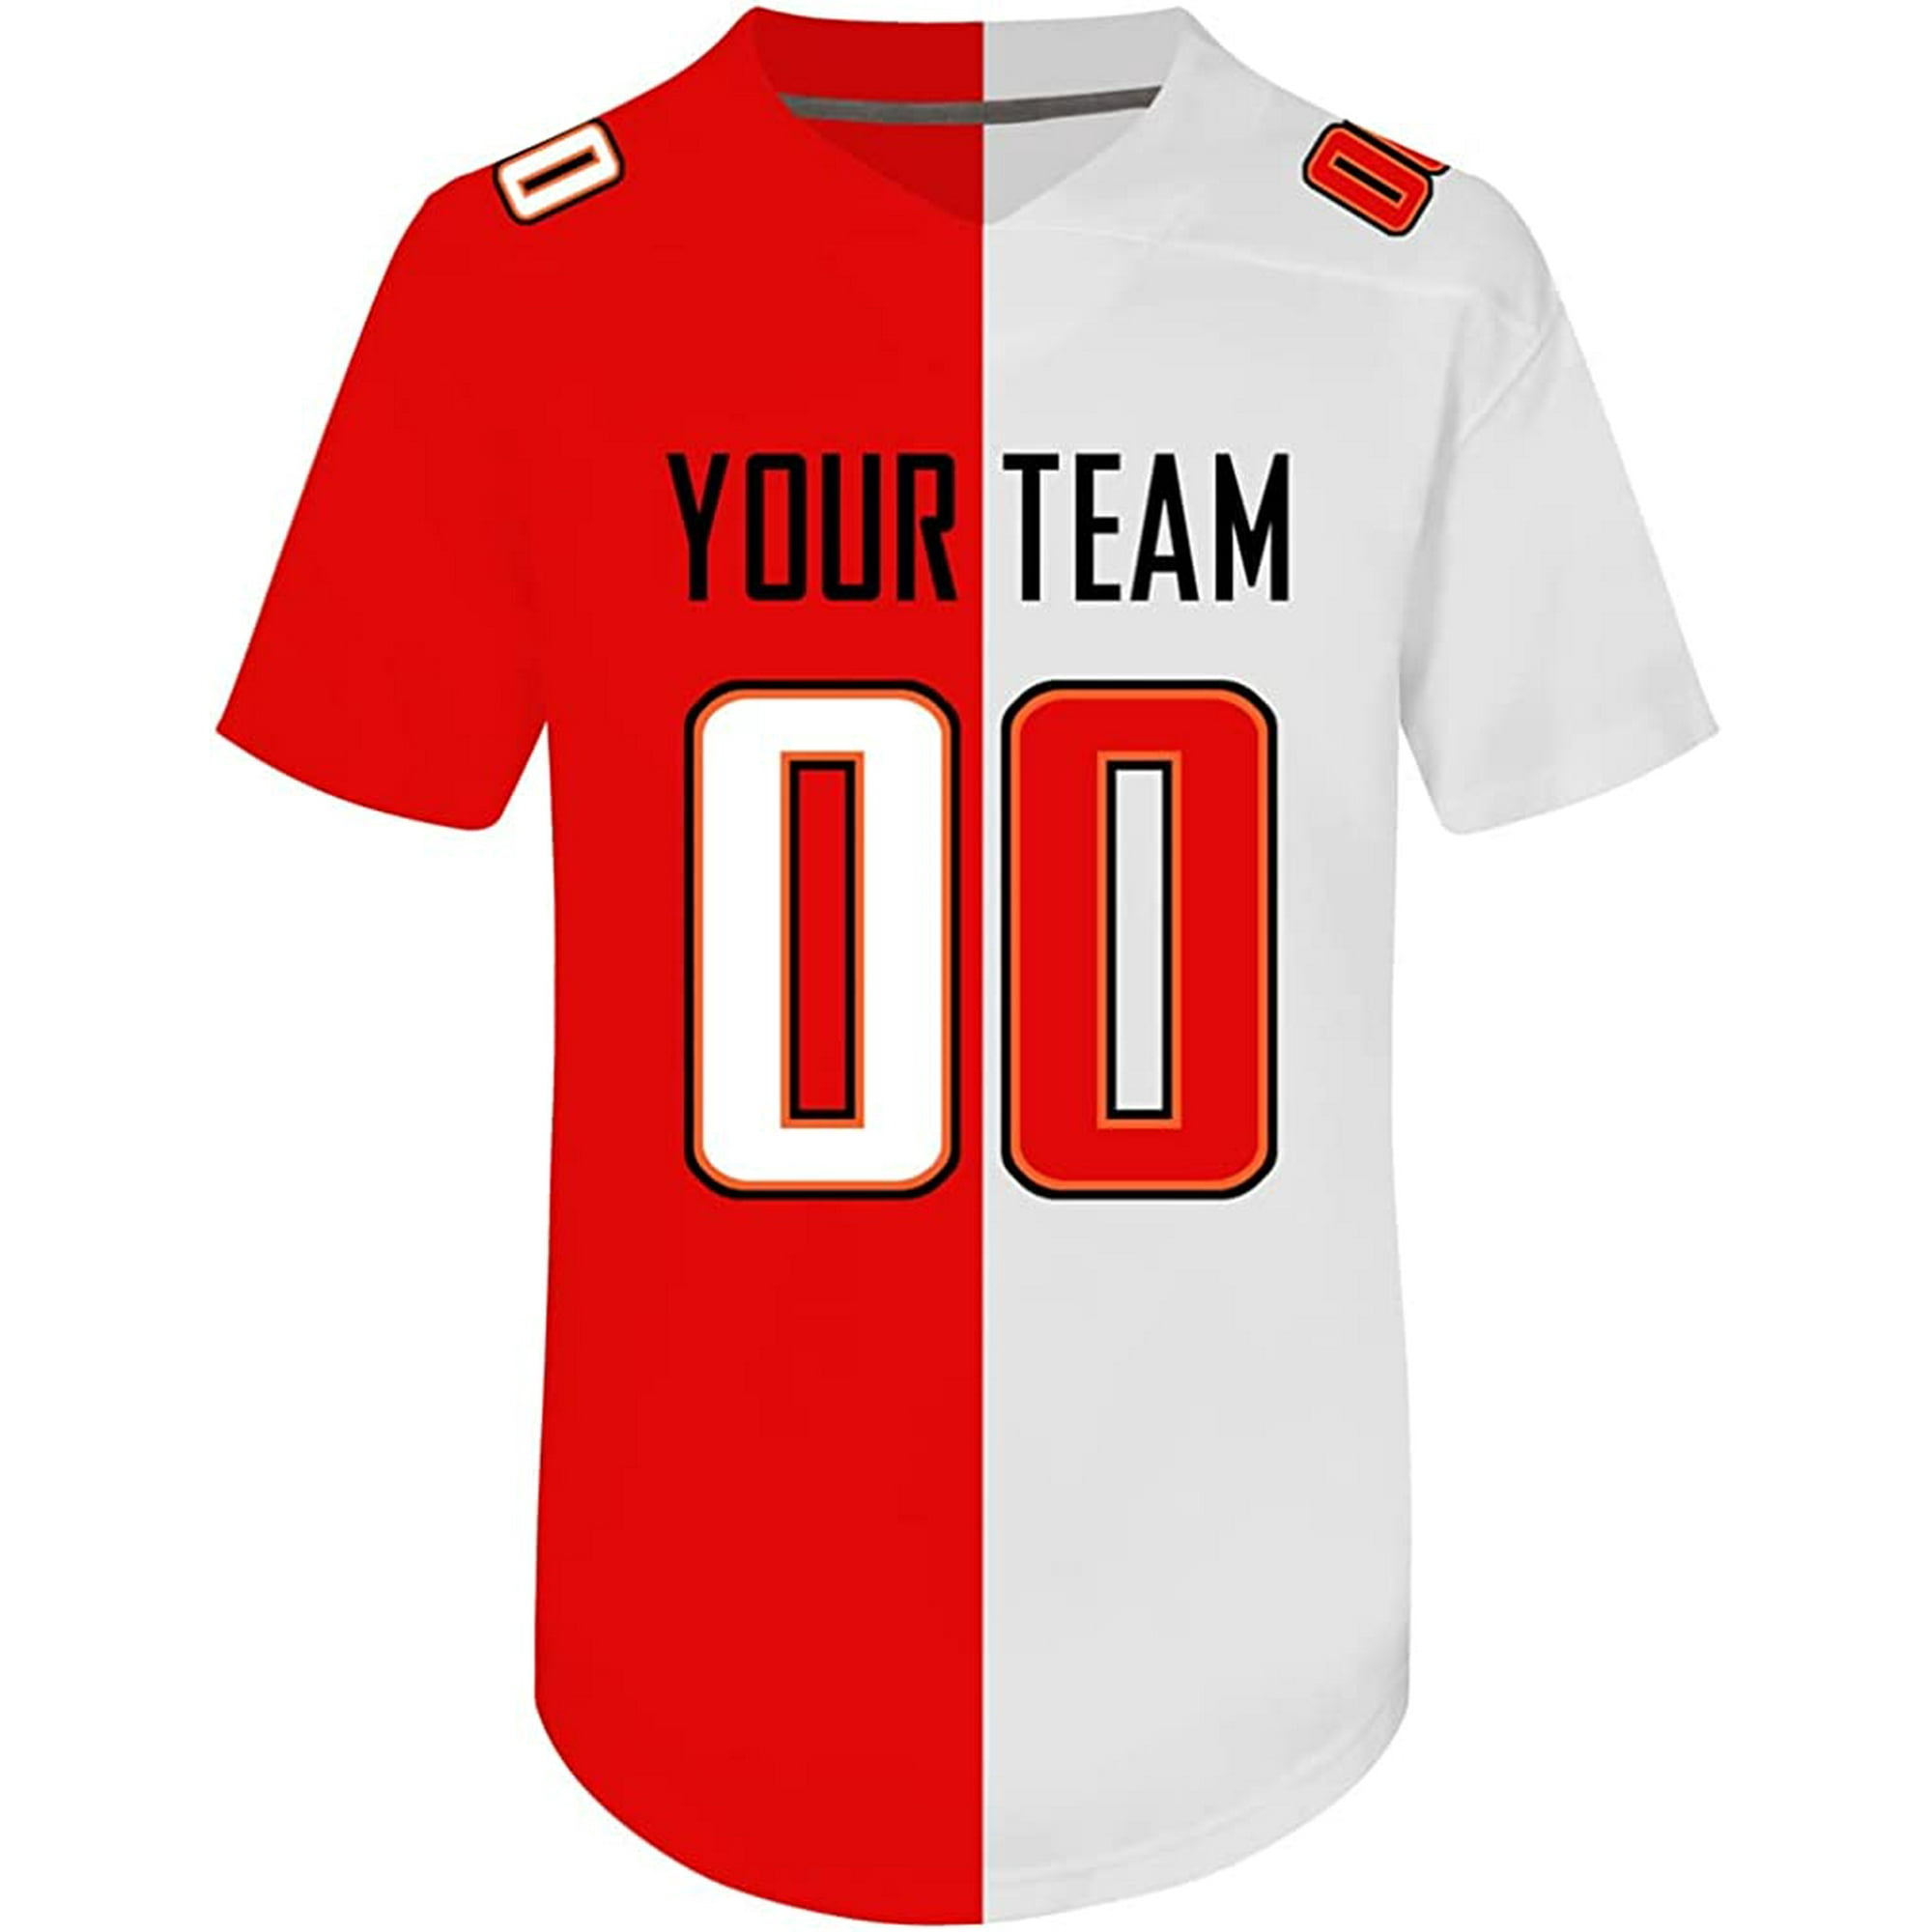 Create your own football jersey with custom name and number